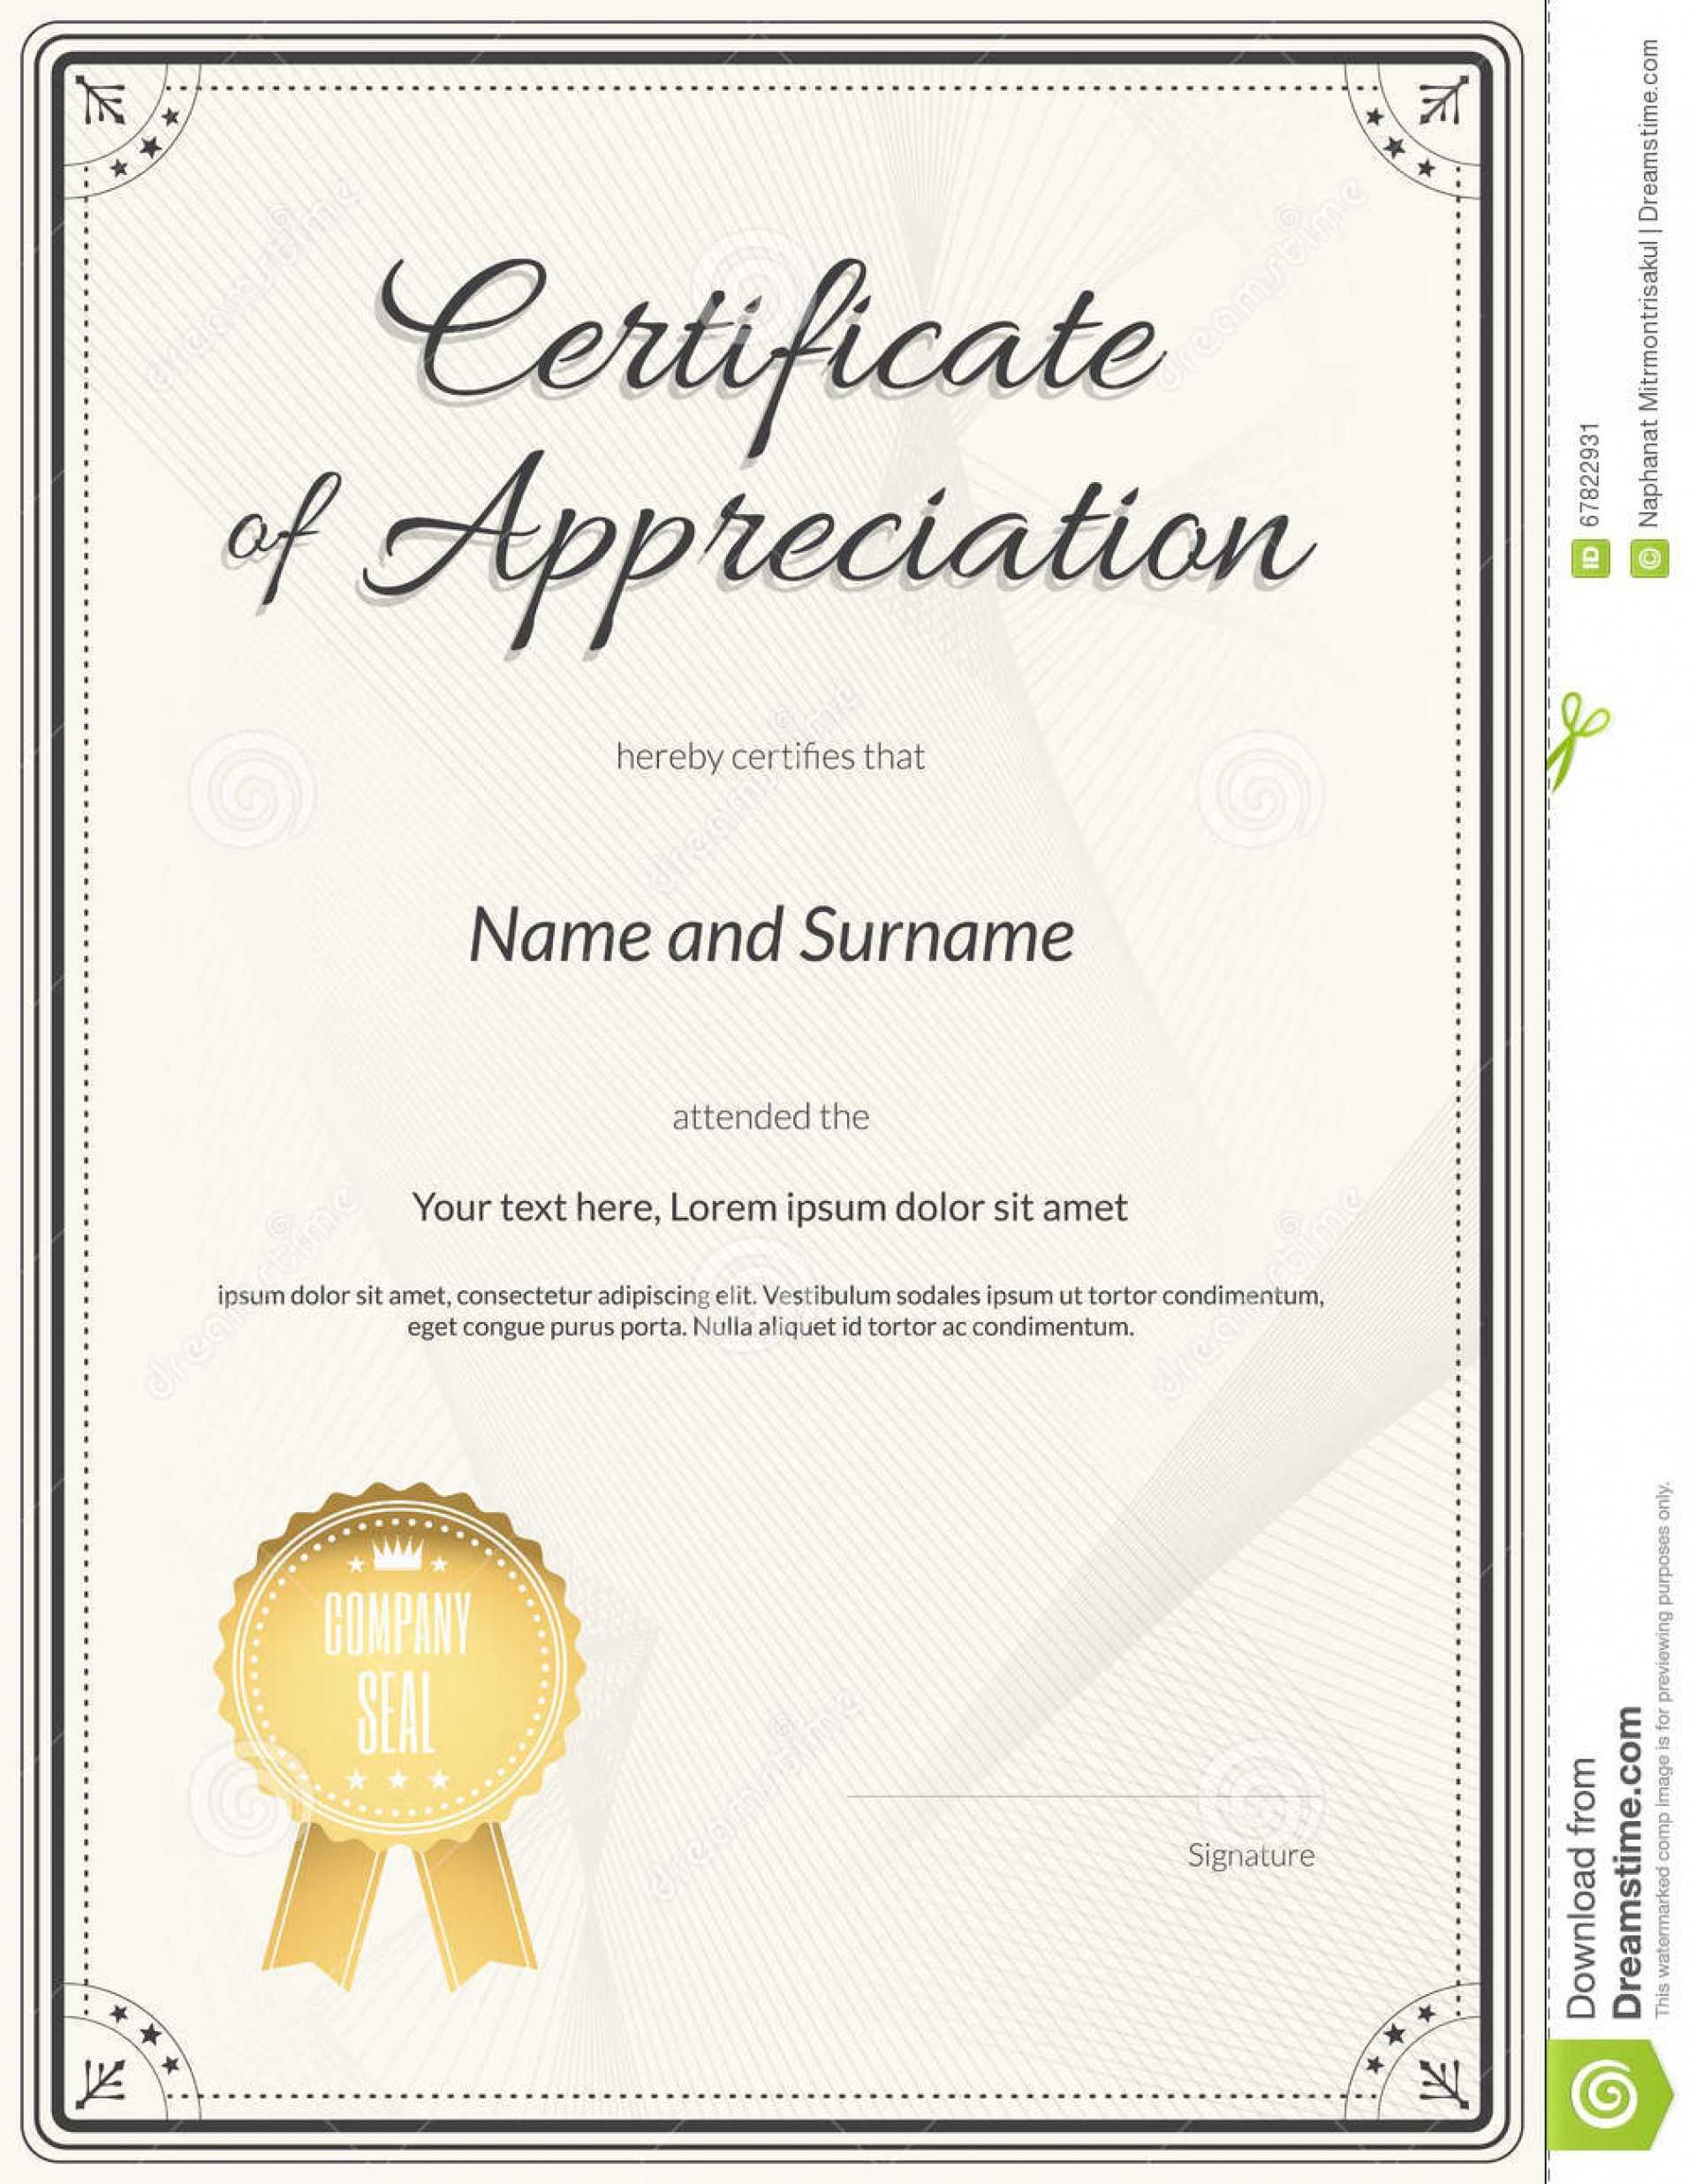 Army Certificate Of Appreciation Template Ppt In Army Certificate Of Appreciation Template